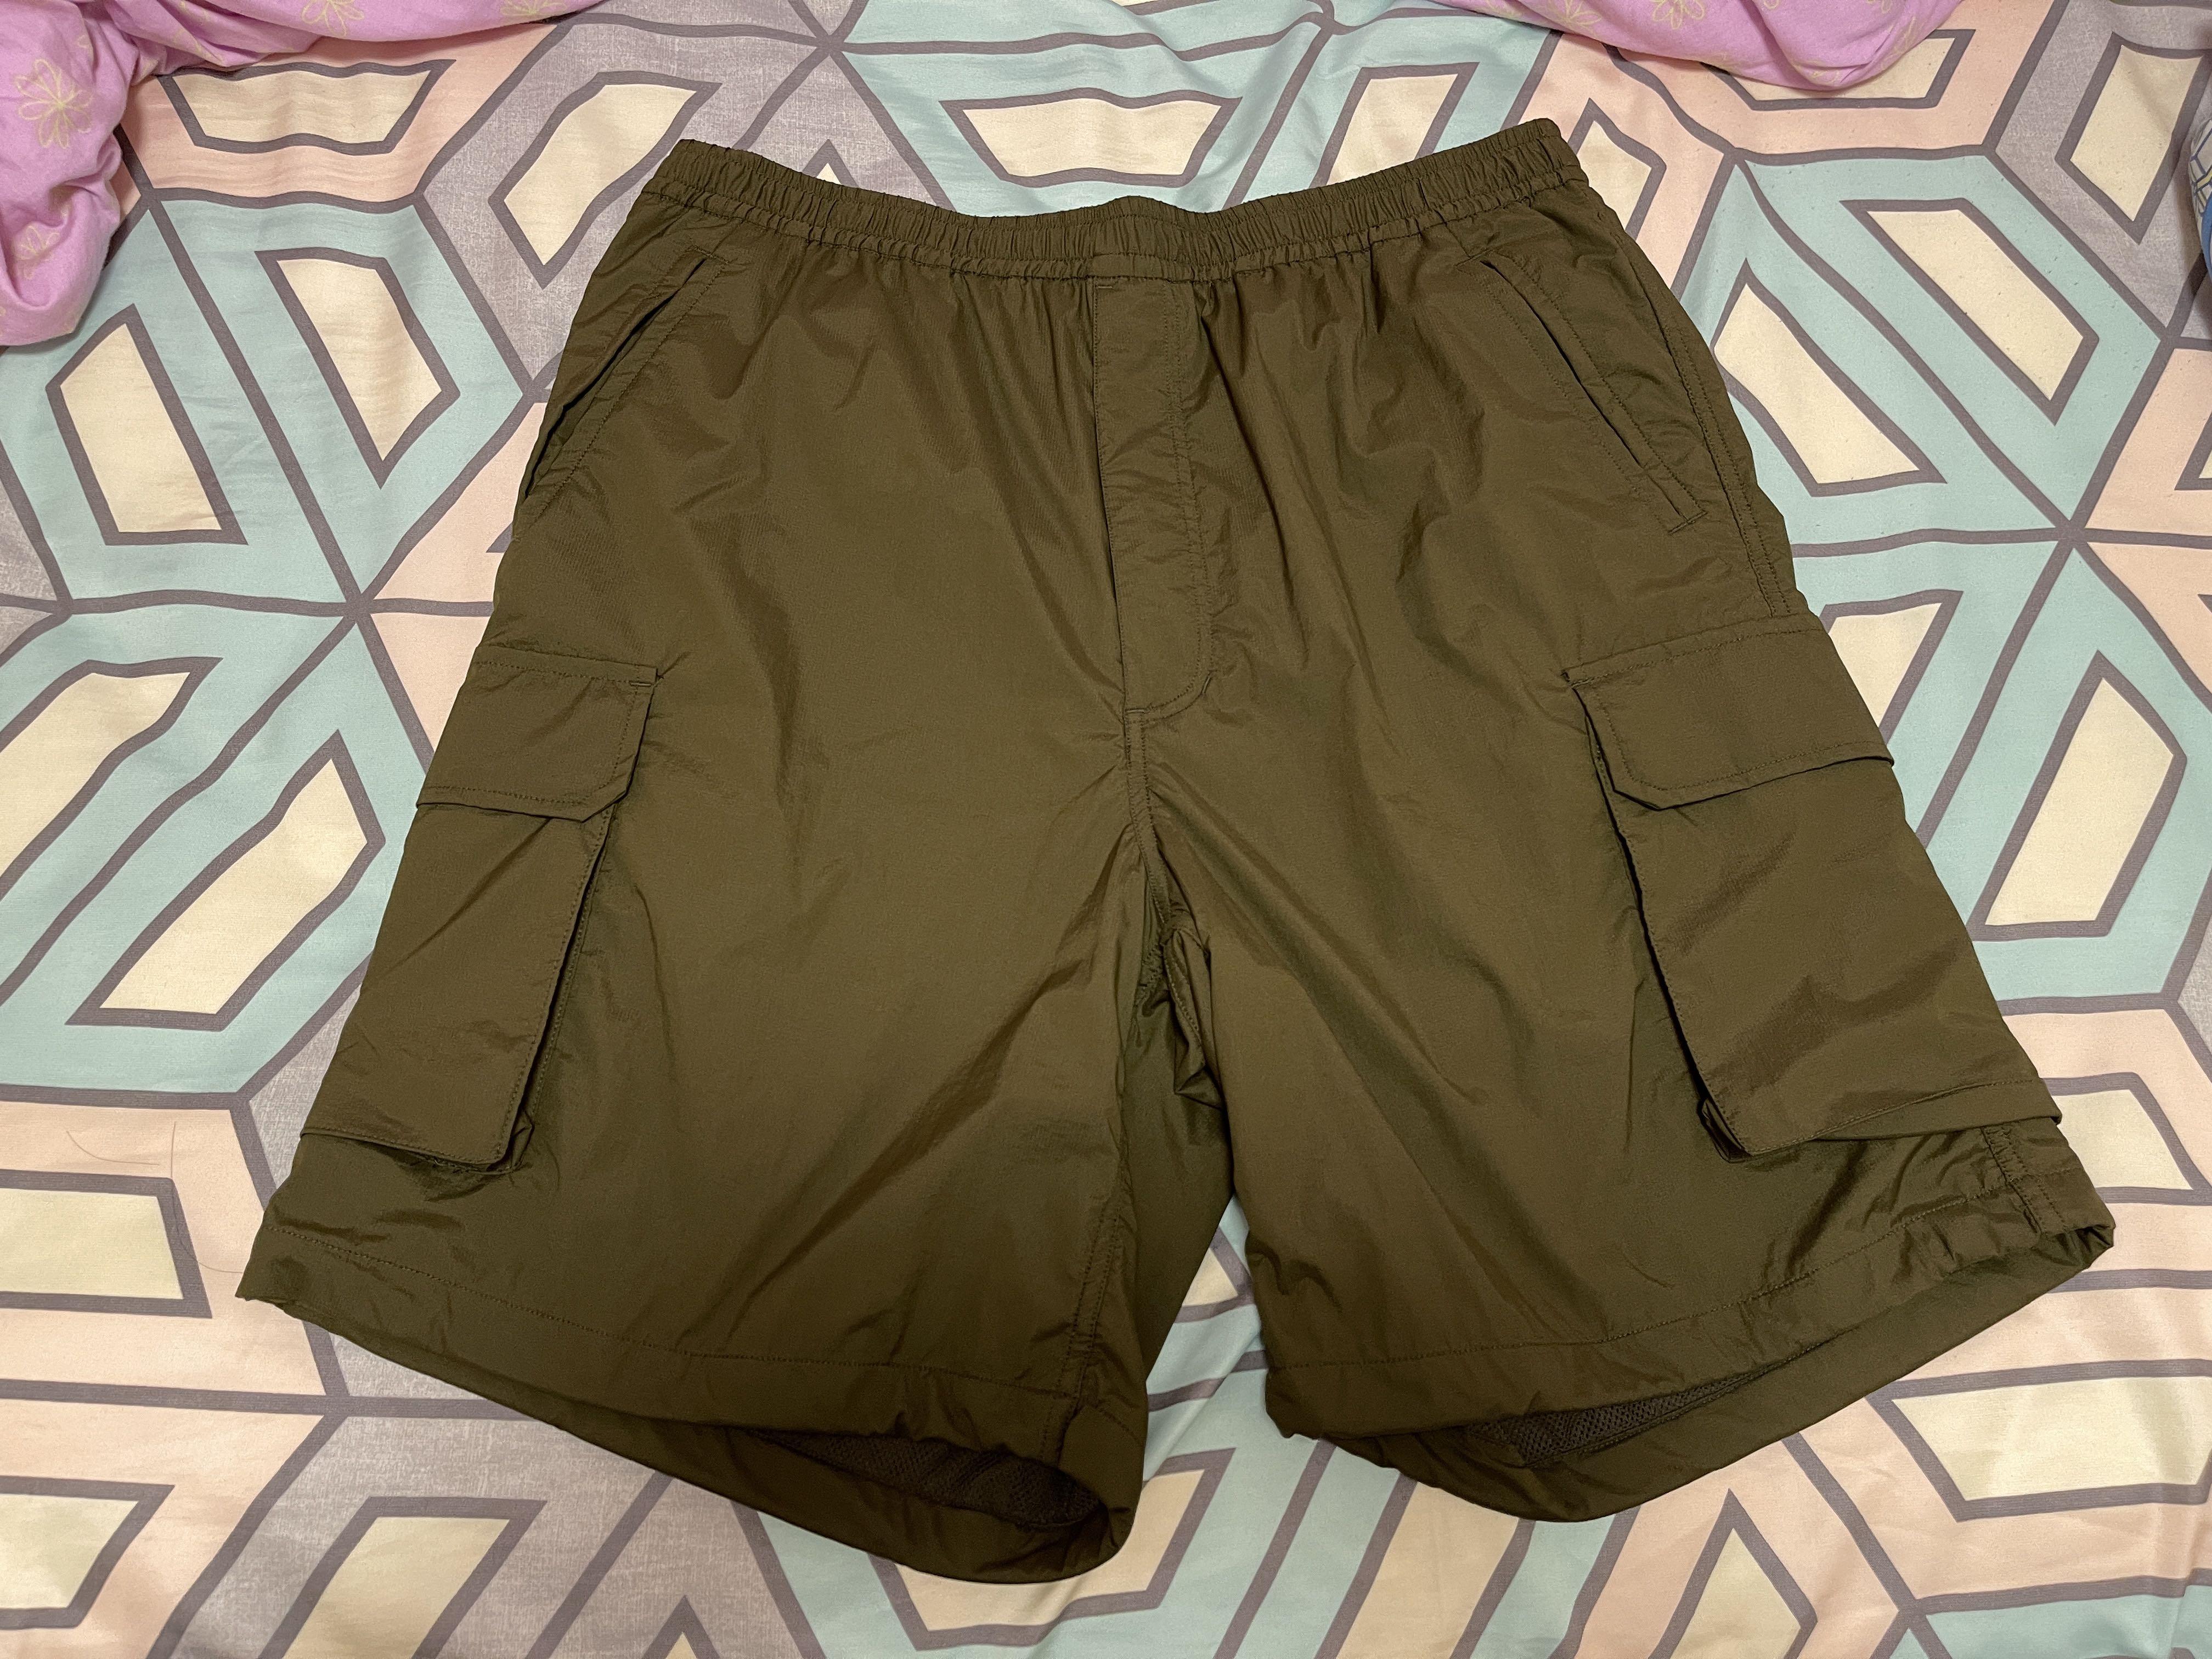 DAIWA PIER 39 21SS Tech French Mil Field Shorts olive color size L